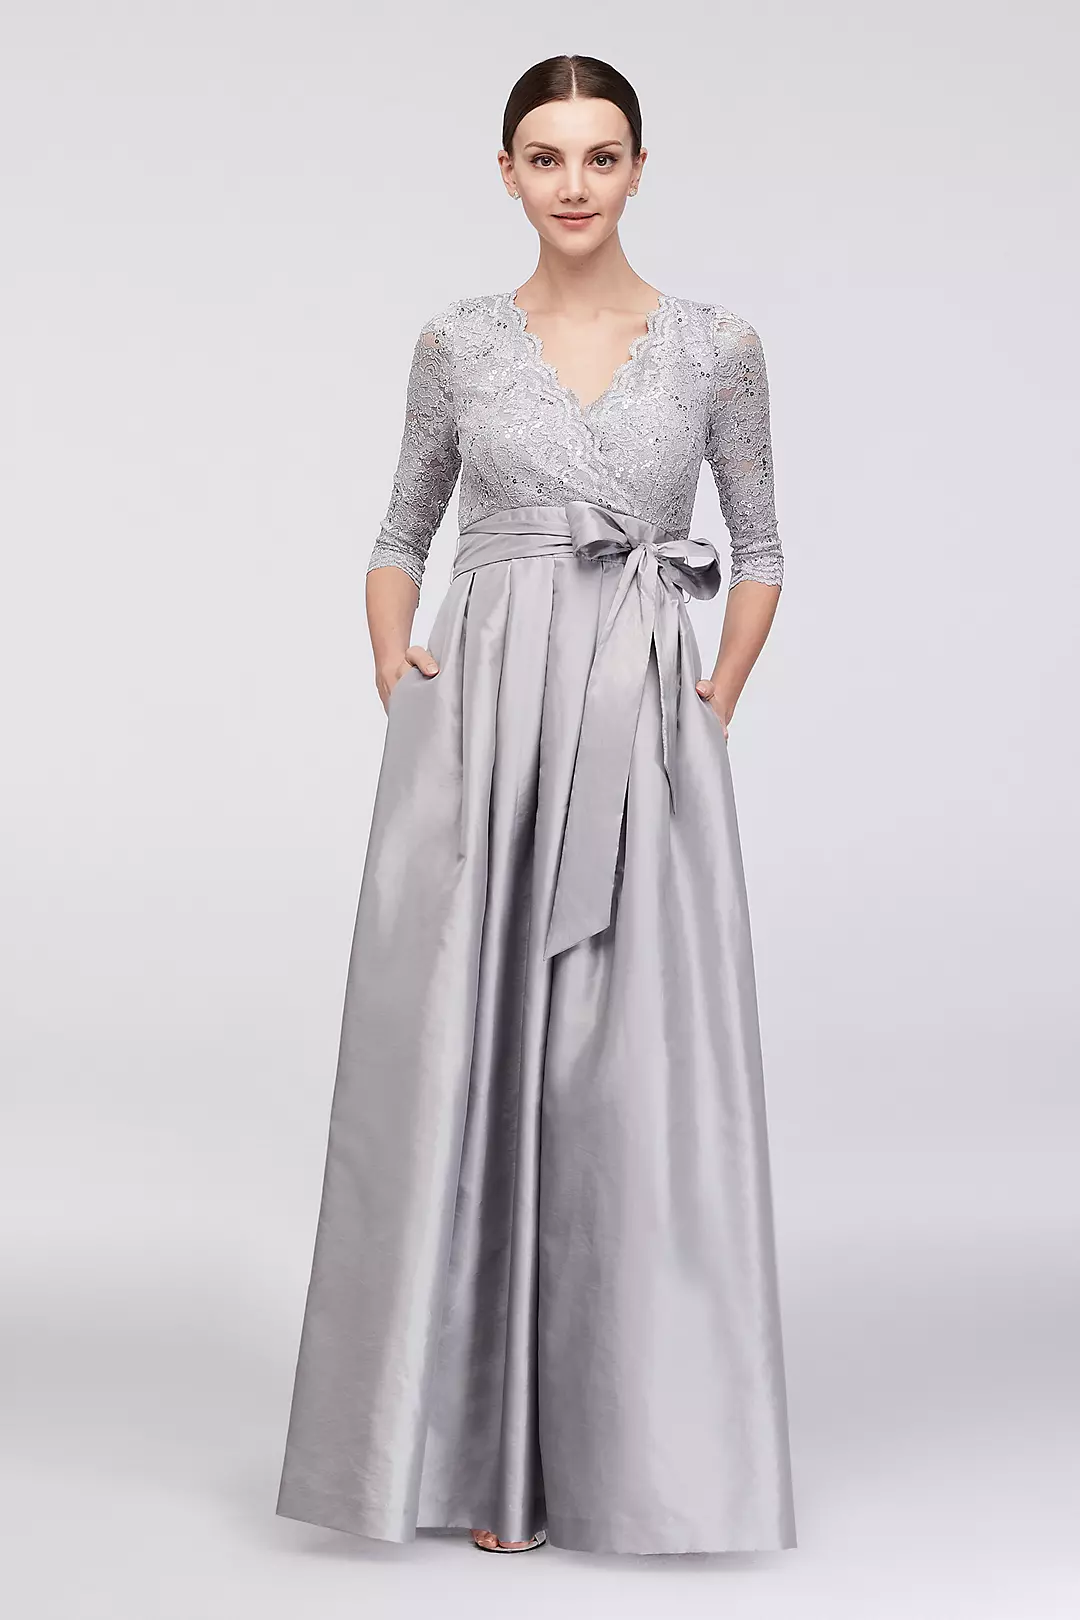 Lace and Taffeta Surplice Ball Gown Image